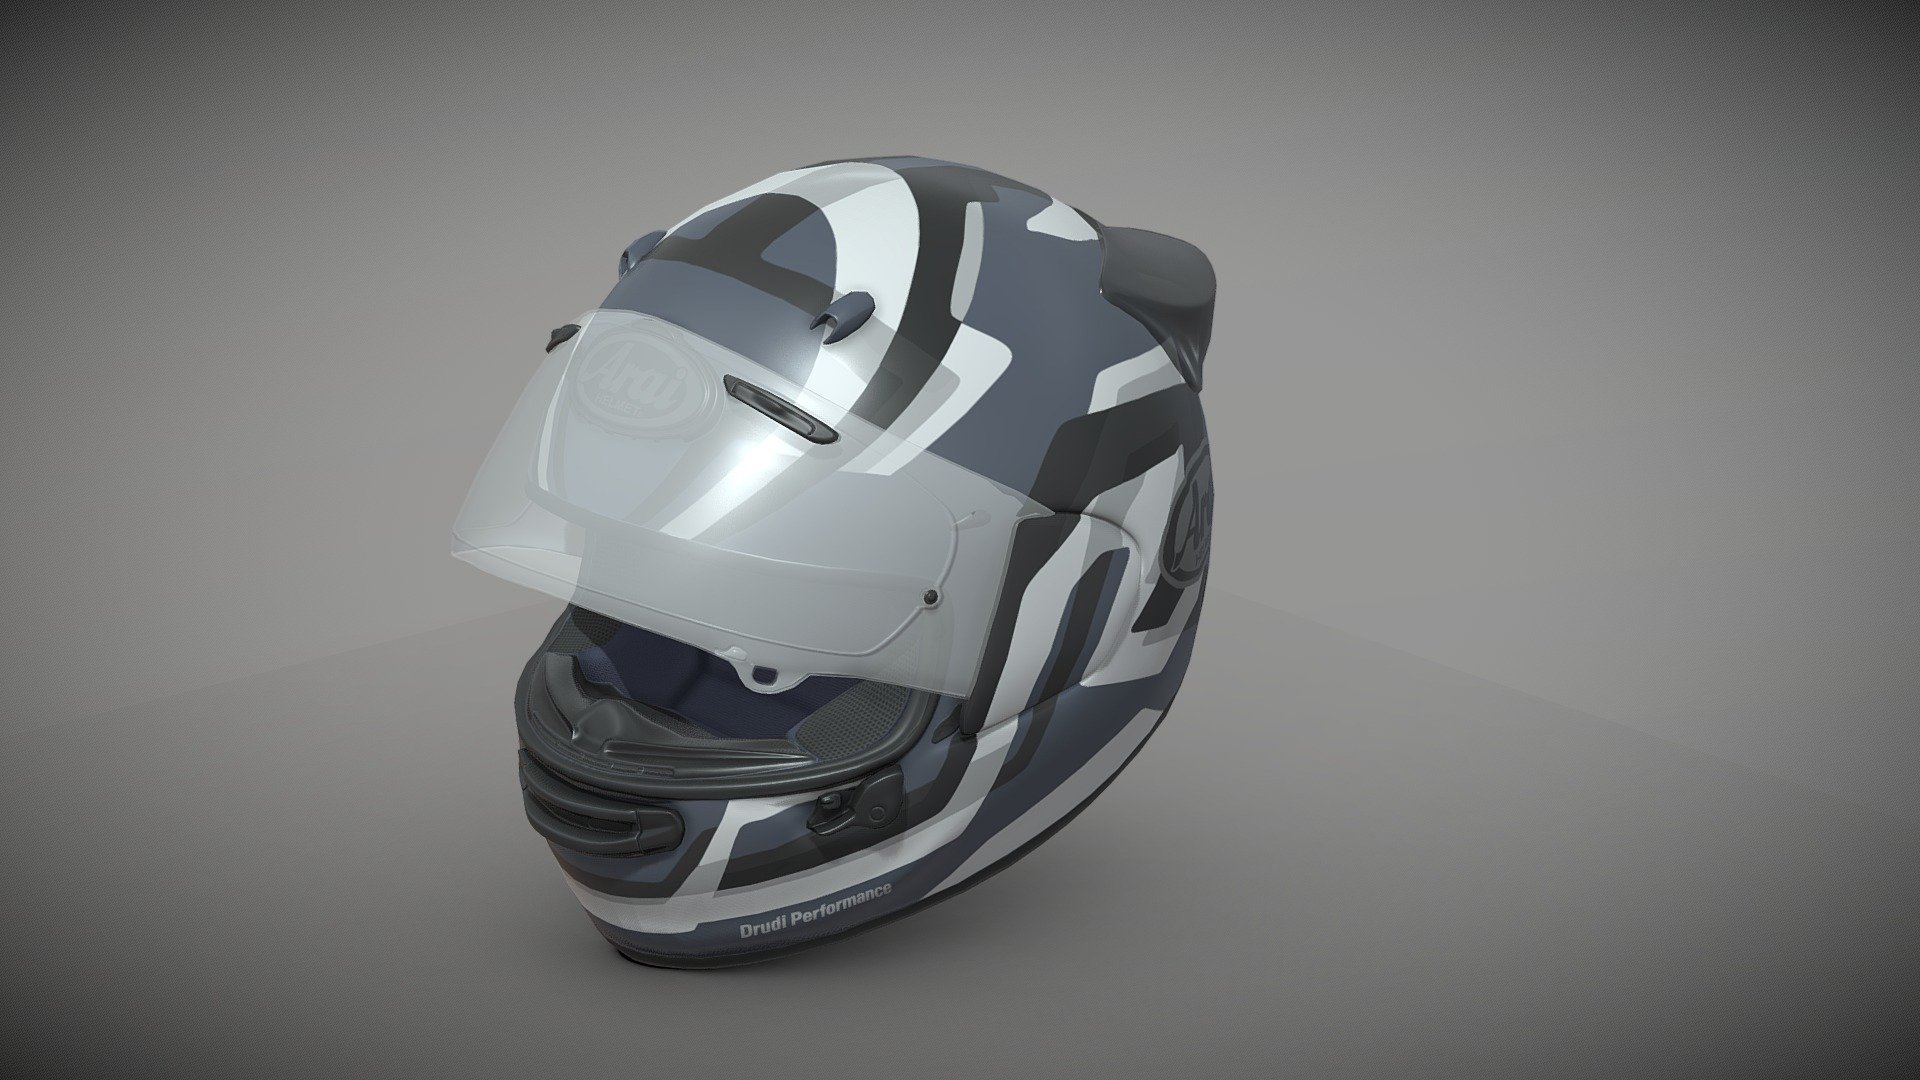 Helmet Arai Quantic Grey. Modeled in Blender, textured in Substance painter. For the project Ride5 3d model